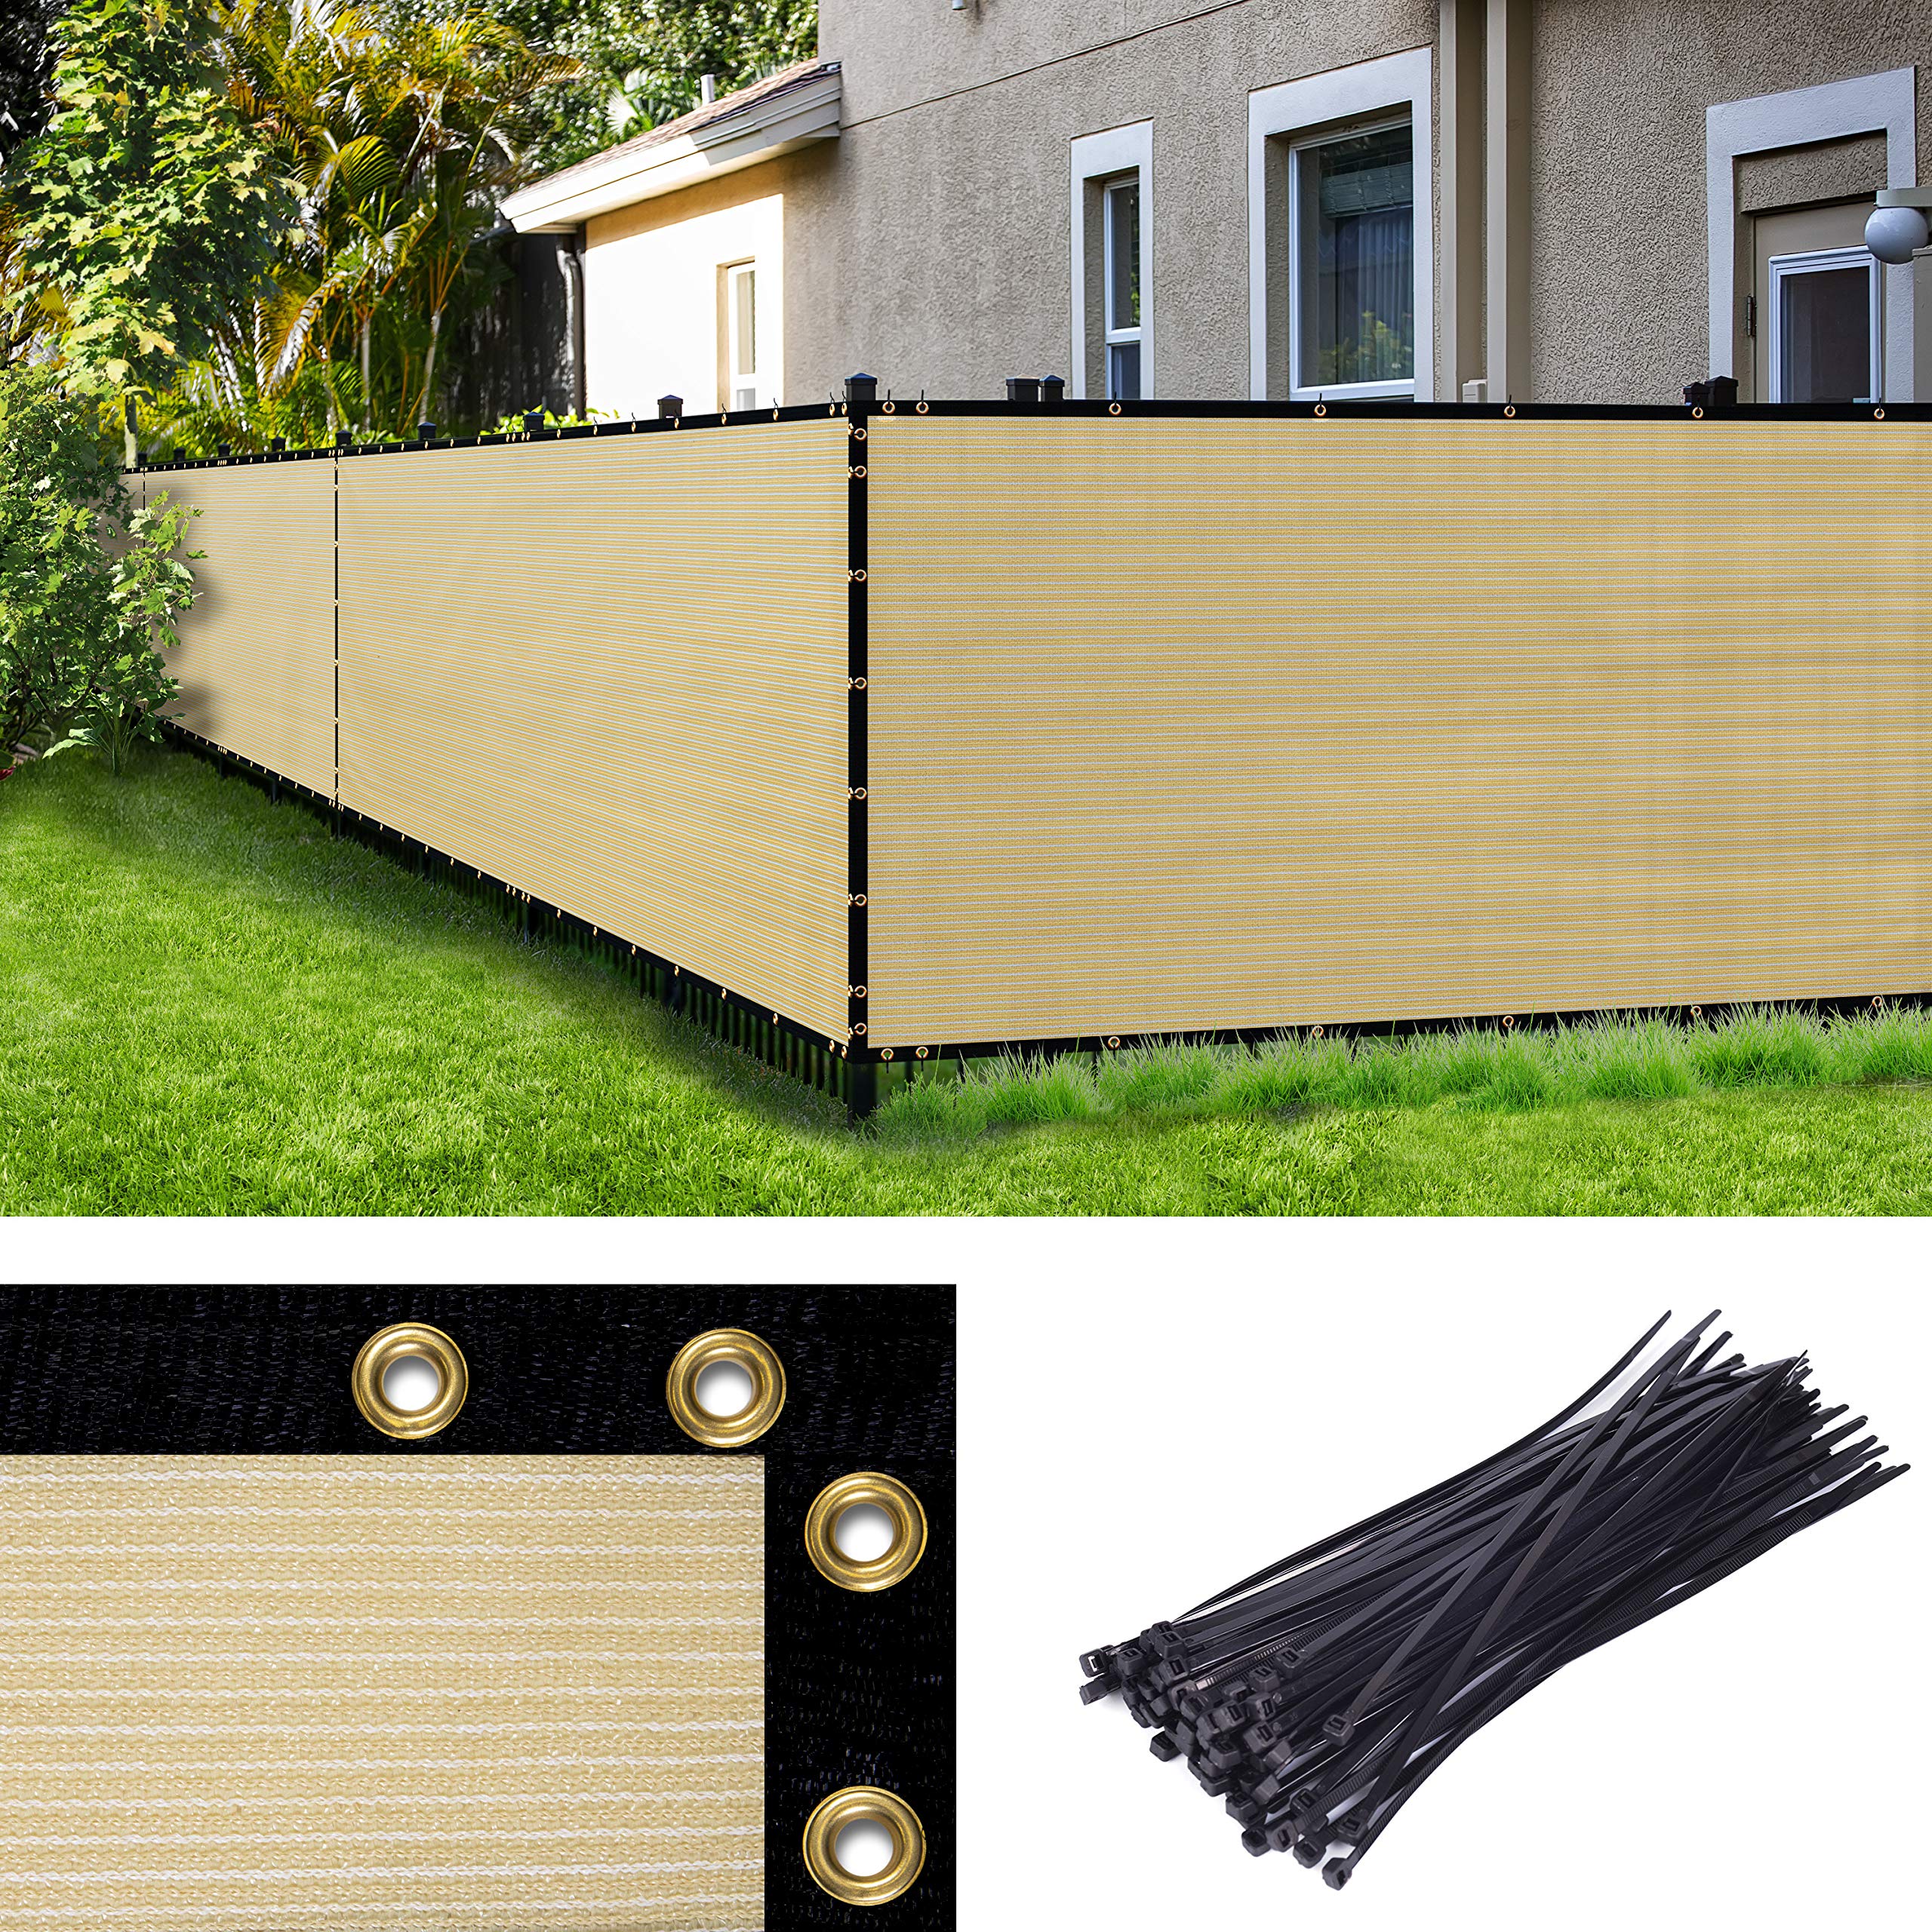 Amgo custom Made 6 x 188 custom Size Beige Fence Privacy Screen Windscreen,with Bindings & grommets Heavy Duty for comme